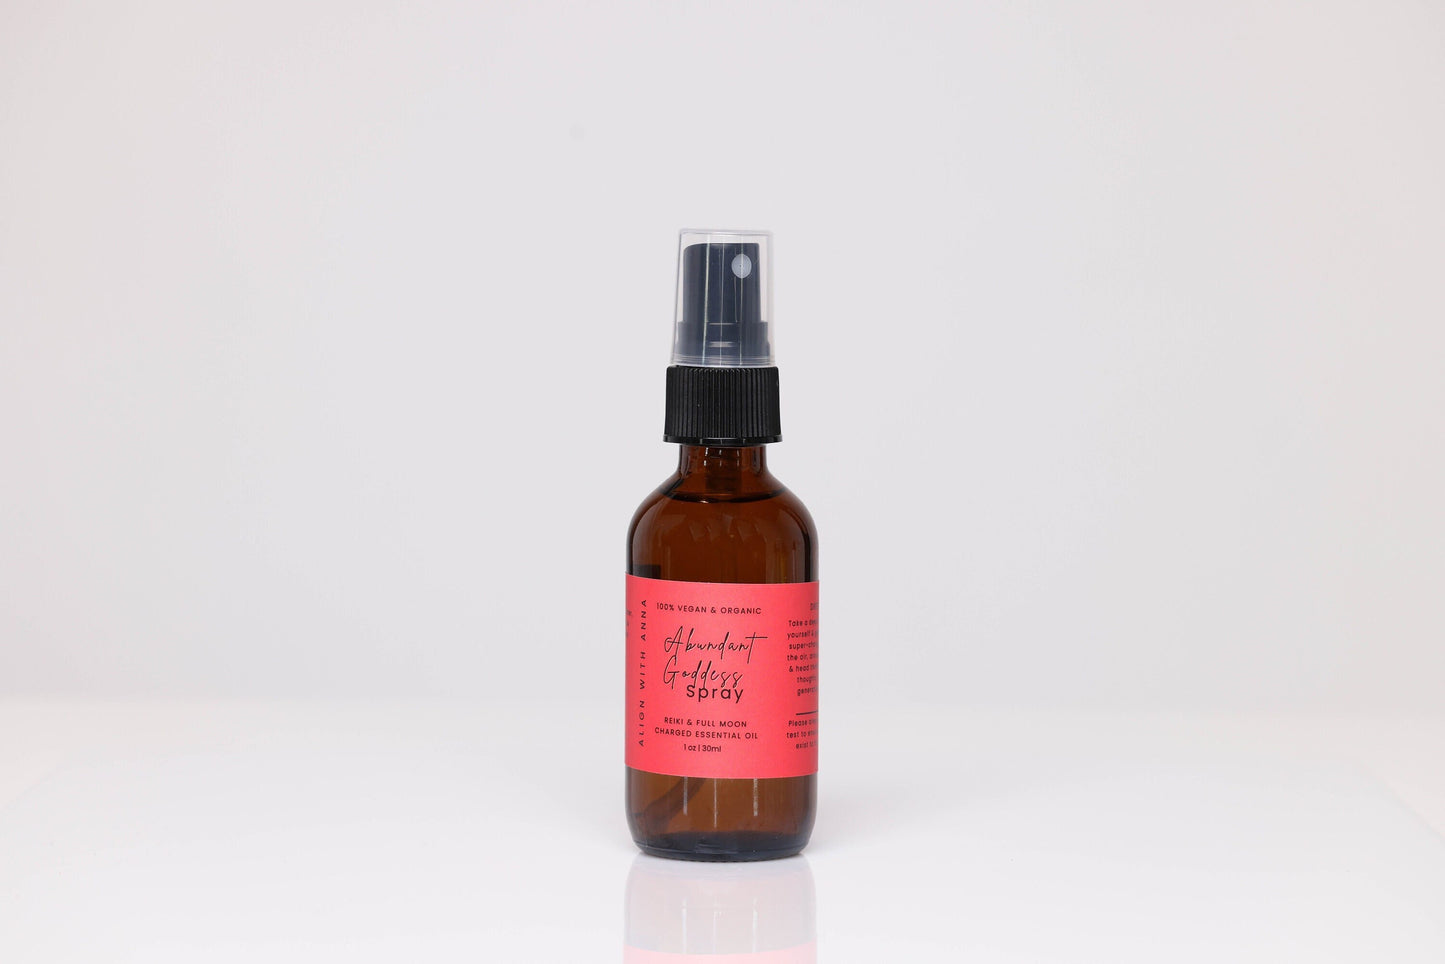 Abundance Spray Perfume from Natural Vegan Essential Oils Wealth Financial Freedom Success Manifestation Energy Protection Orange Geranium Scent Align With Anna Anna Ortiz-Aragon Aromatherapy Products Women Made The Pachamama Shift